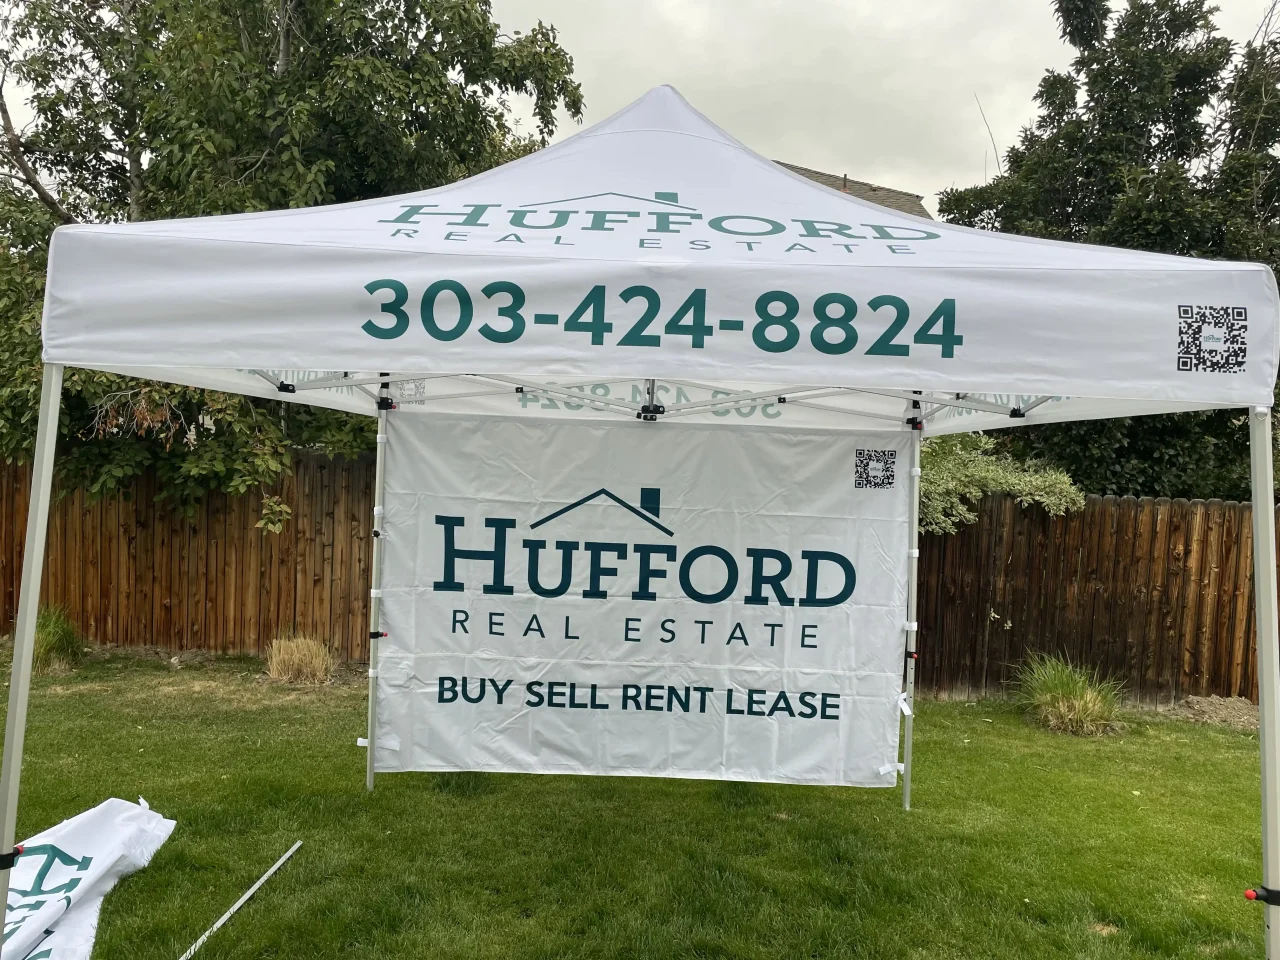 branded tents